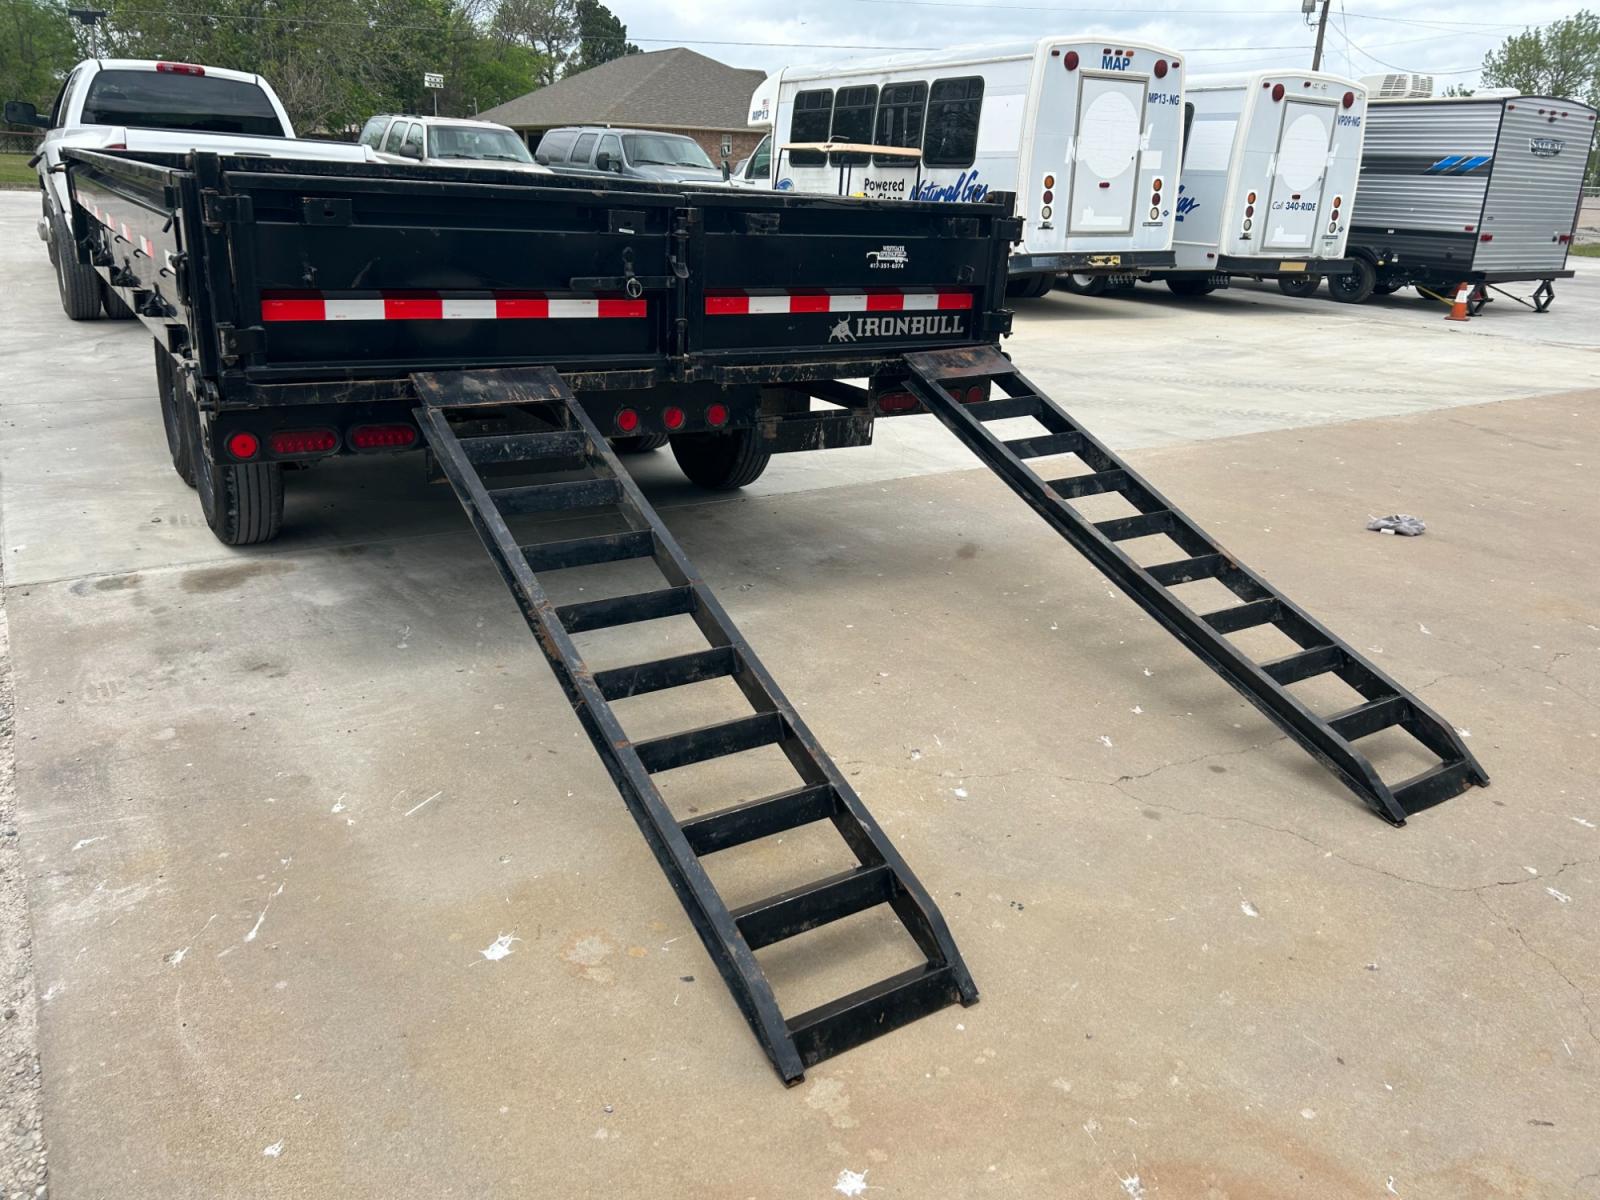 2022 BLACK IRONBULL DUMP TRAILER DUMPBED (50HDP1620N1) , located at 17760 Hwy 62, Morris, OK, 74445, 35.609104, -95.877060 - 2022 deckover dumps offer a raised deck (above the tires) to accommodate 10 gauge fold down sides and a bed width of 96”. The deckover is equipped standard with 10” I beam frame. 3” channel crossmembers span the 10 gauge smooth steel floor. 2 5/16” couplers are equipped standard on each mode - Photo #15